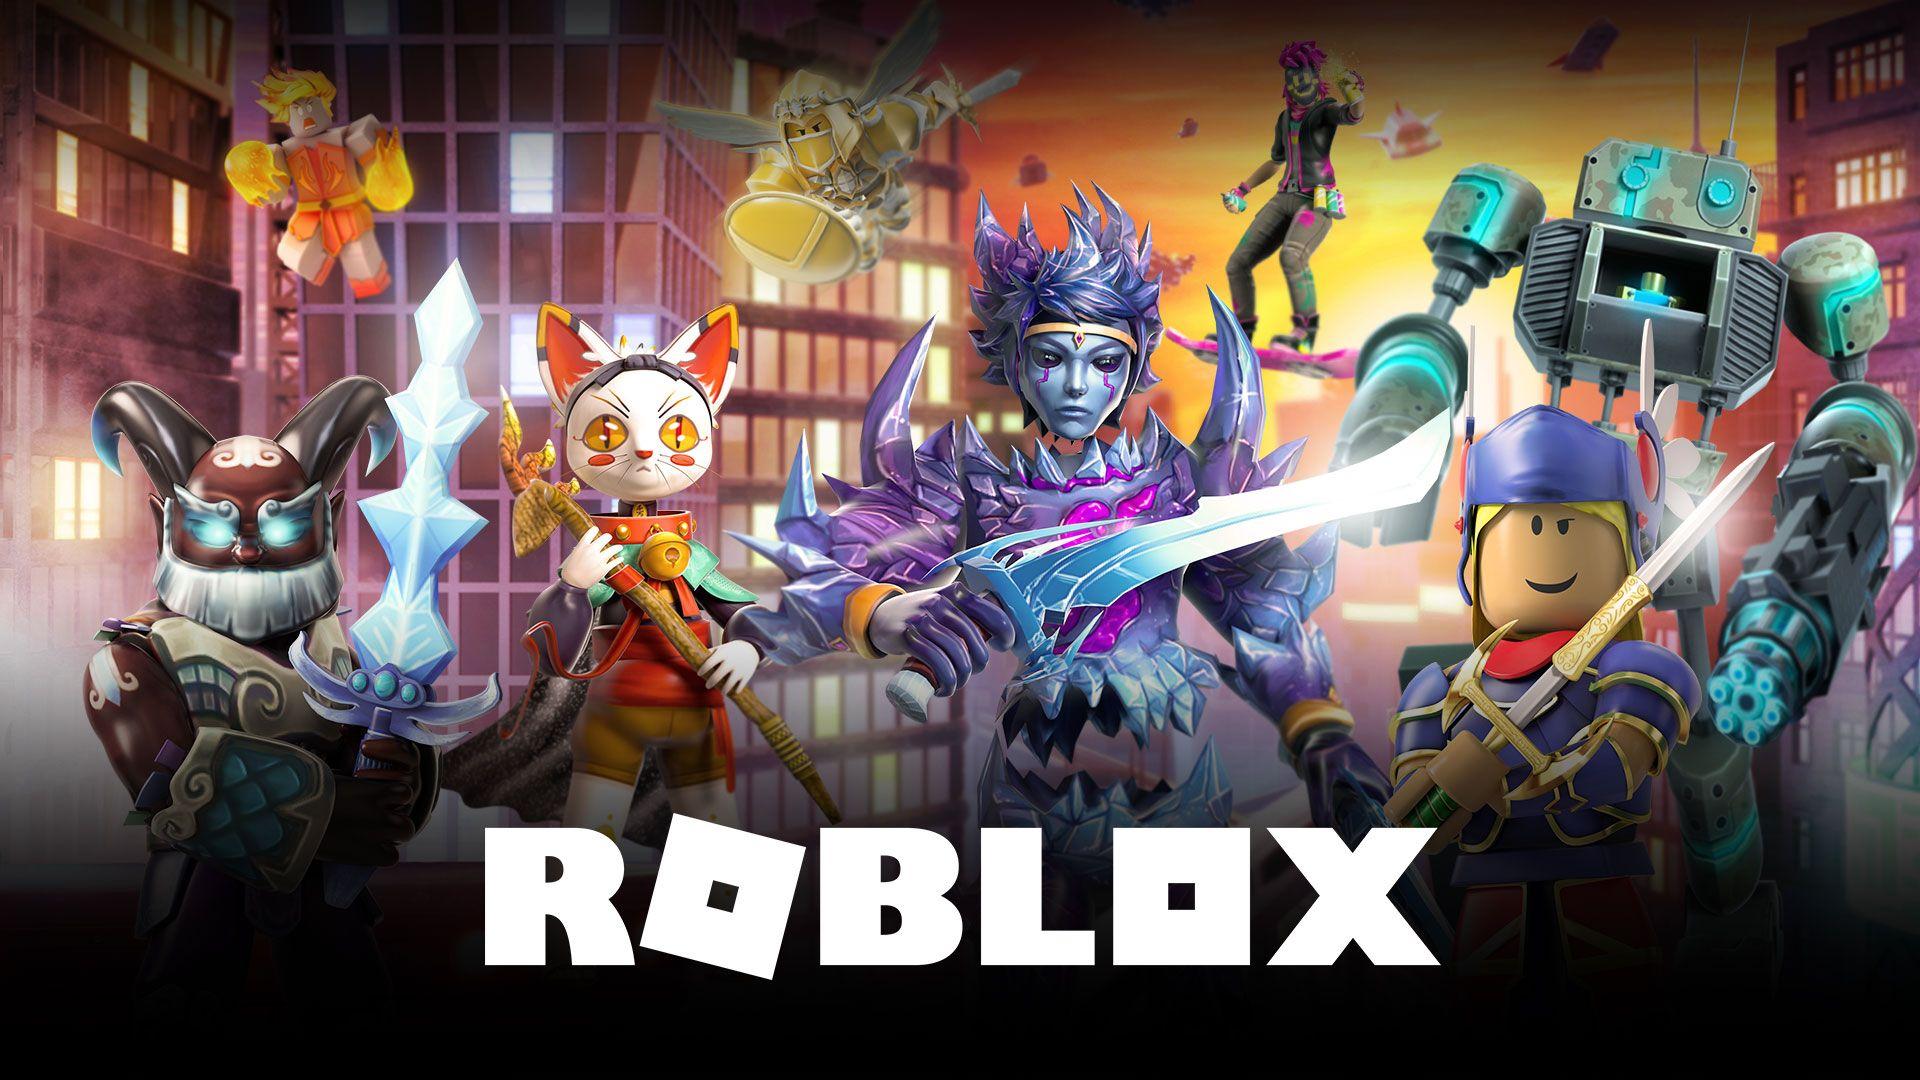 Roblox for Xbox One